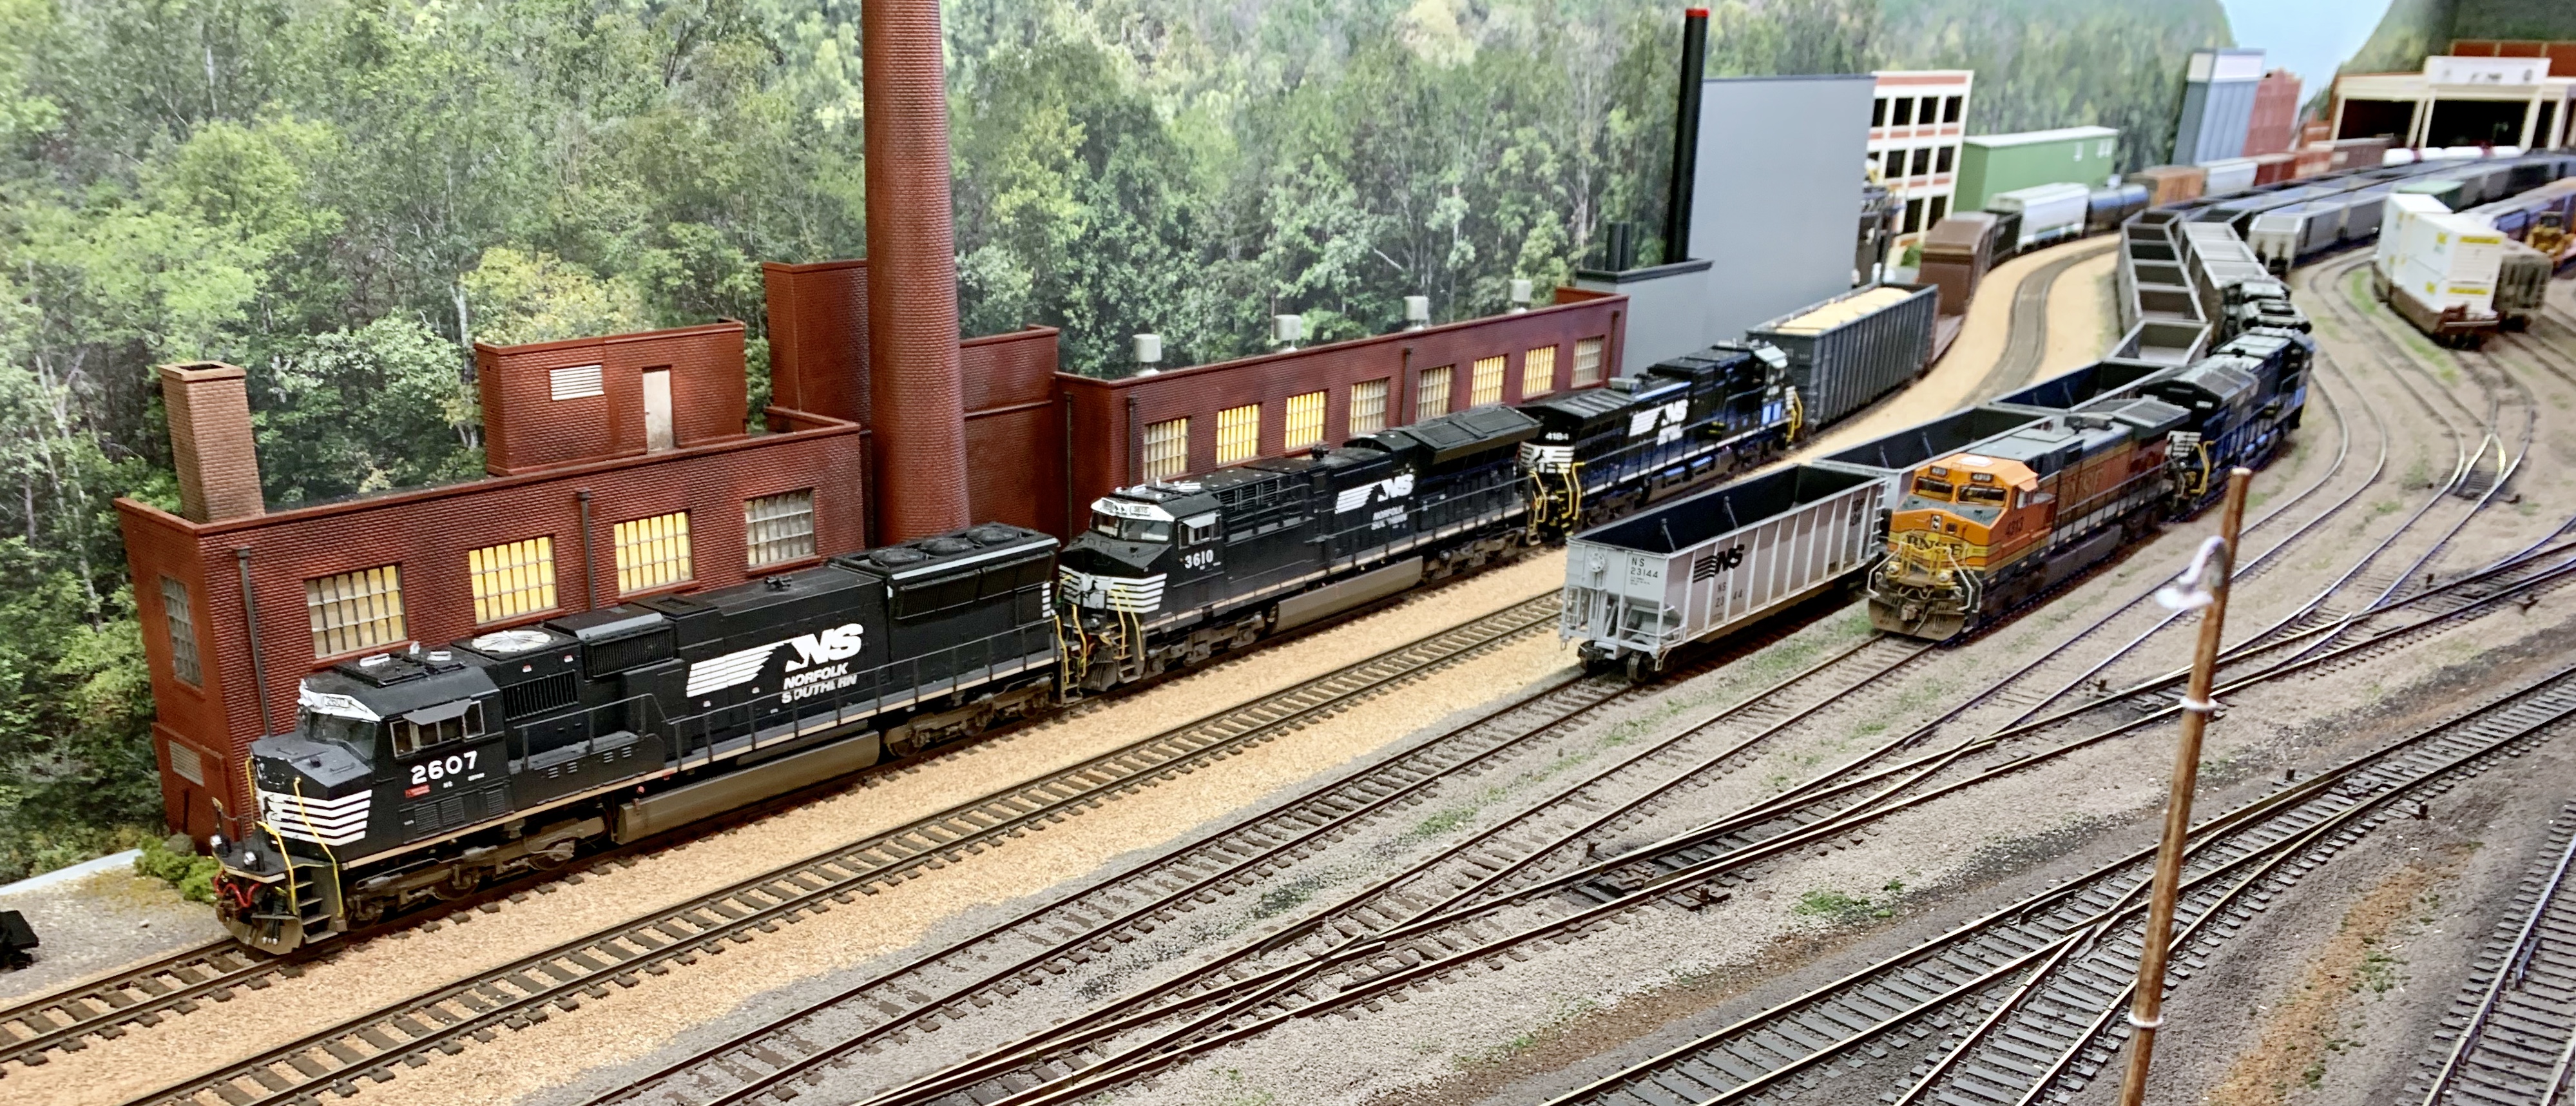 Model Railroading: Where to Beginproduct featured image thumbnail.